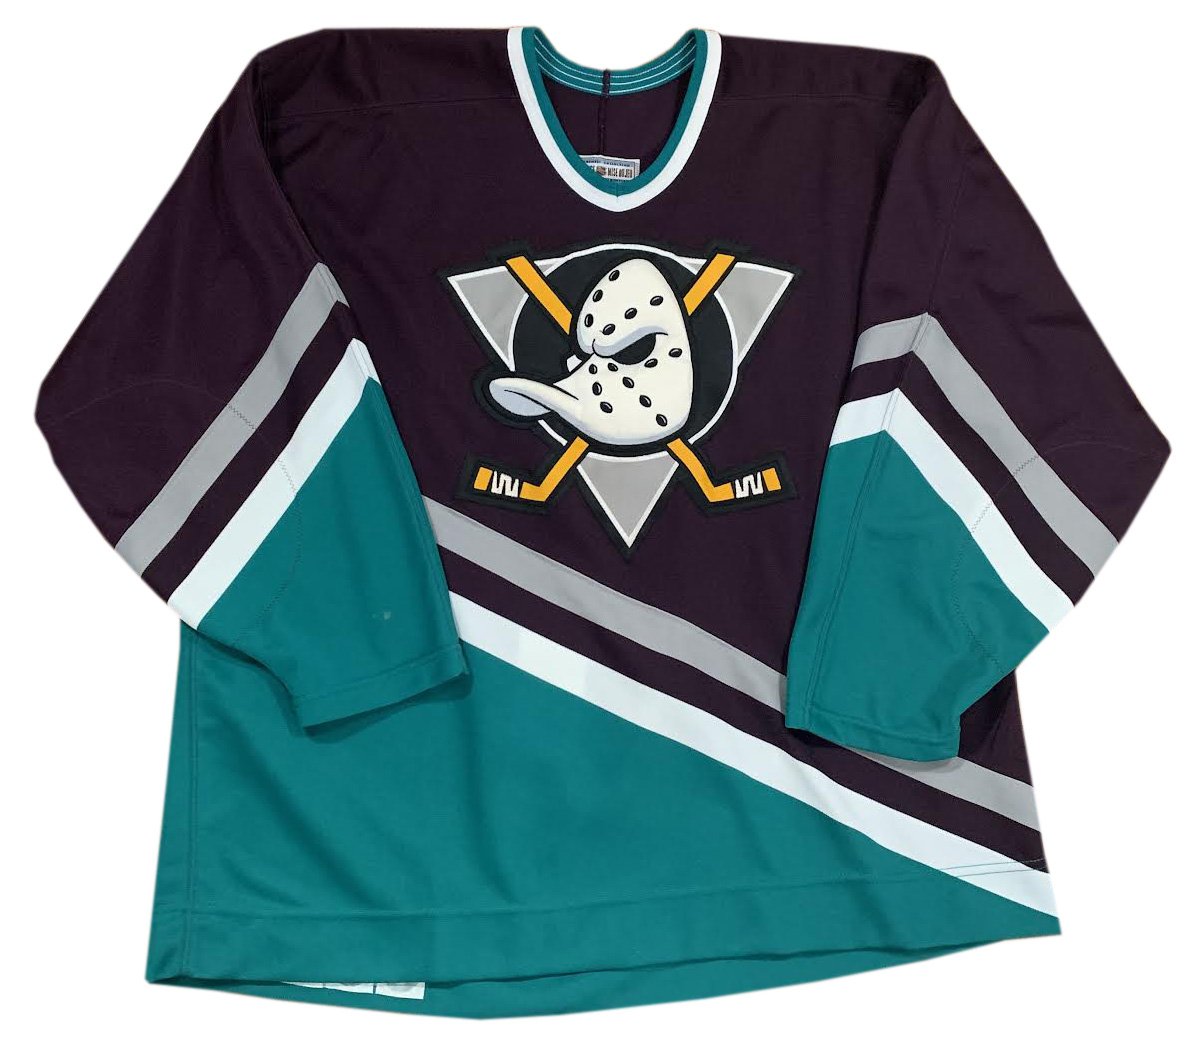 Just picked up this CCM 2001 Mighty Ducks authentic jersey for $80